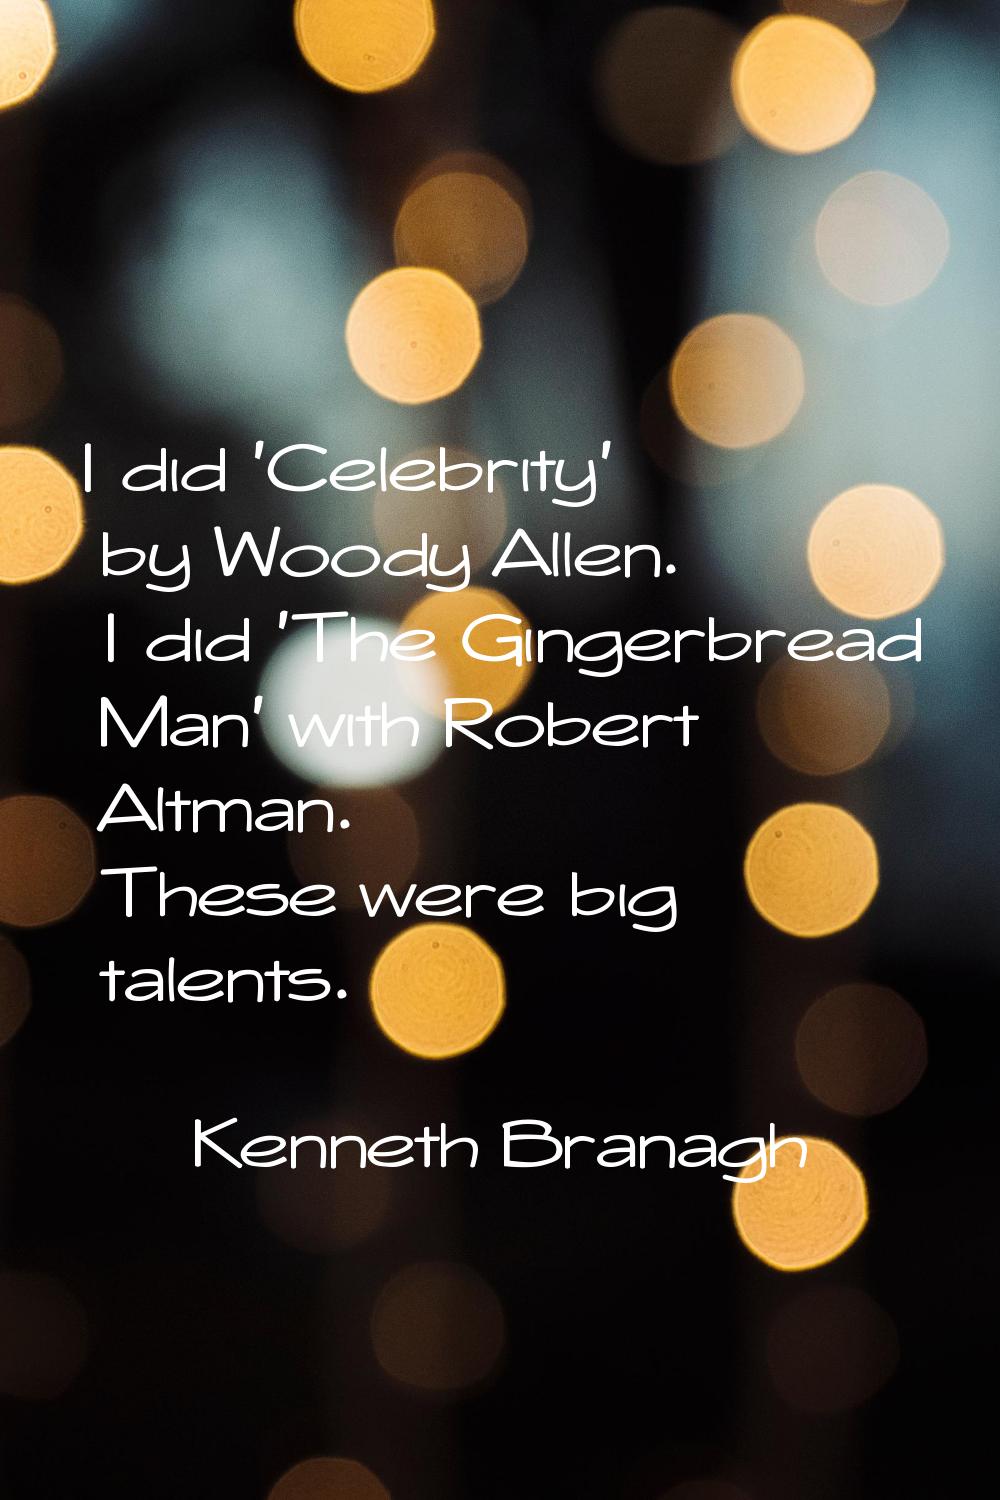 I did 'Celebrity' by Woody Allen. I did 'The Gingerbread Man' with Robert Altman. These were big ta